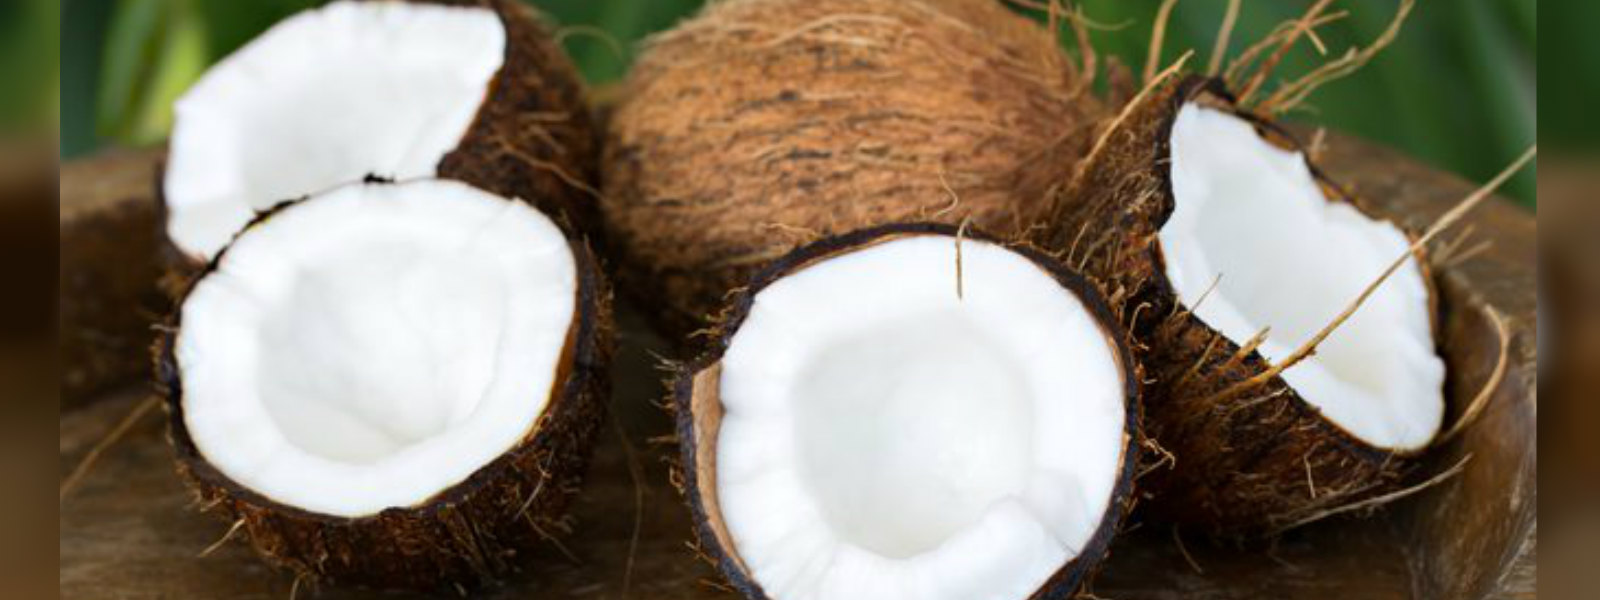 1.5 million coconuts for sale at e-auction